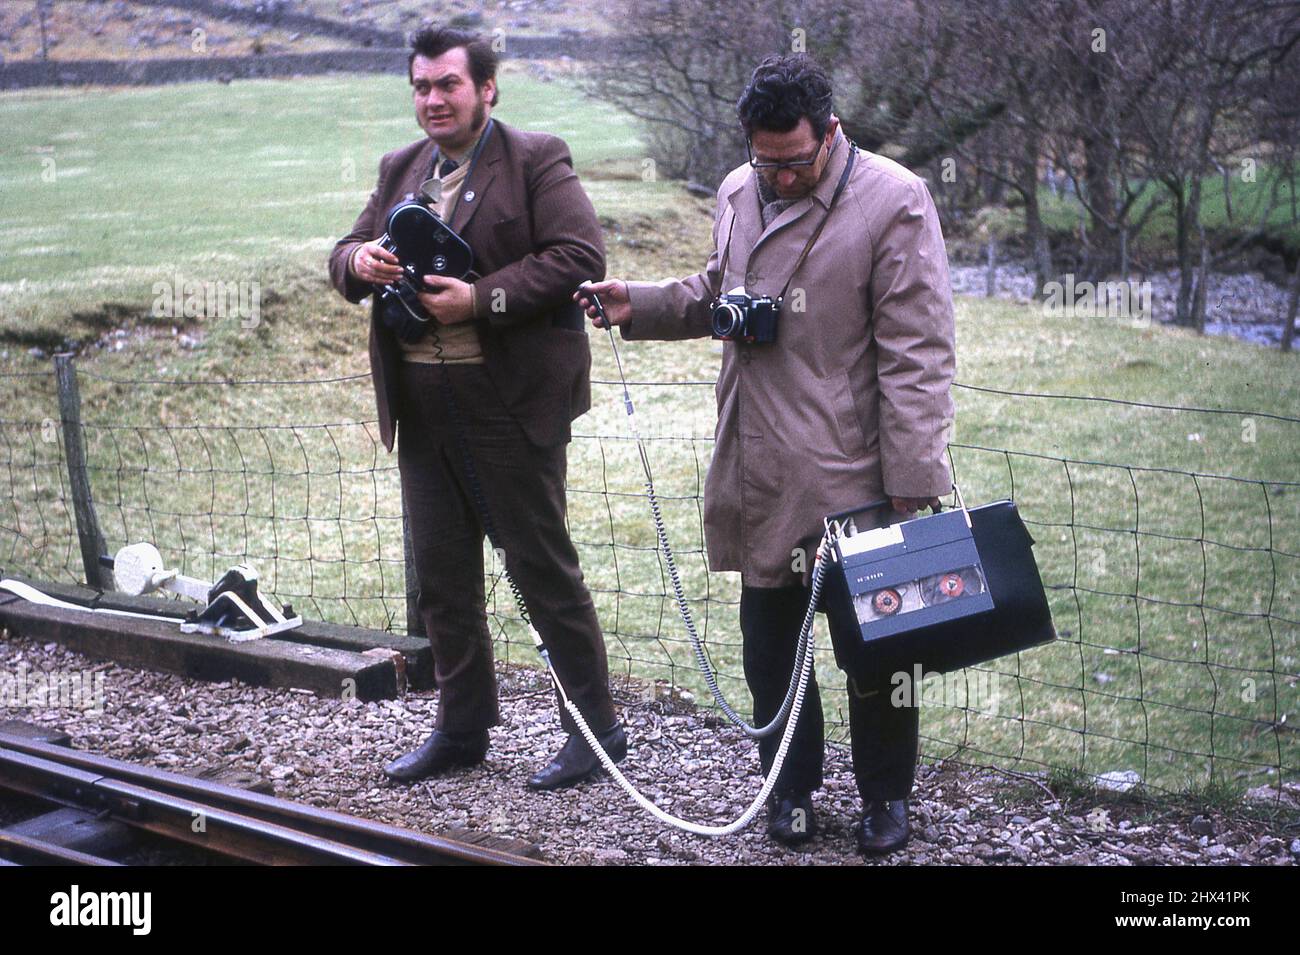 1971, May, a film cameraman and a sound or audio recordist, on location, standing beside a railway track, England, UK. The sound recordist is holding a portable reel to reel sound recording machine and microphone to record the surrounding sounds. Stock Photo